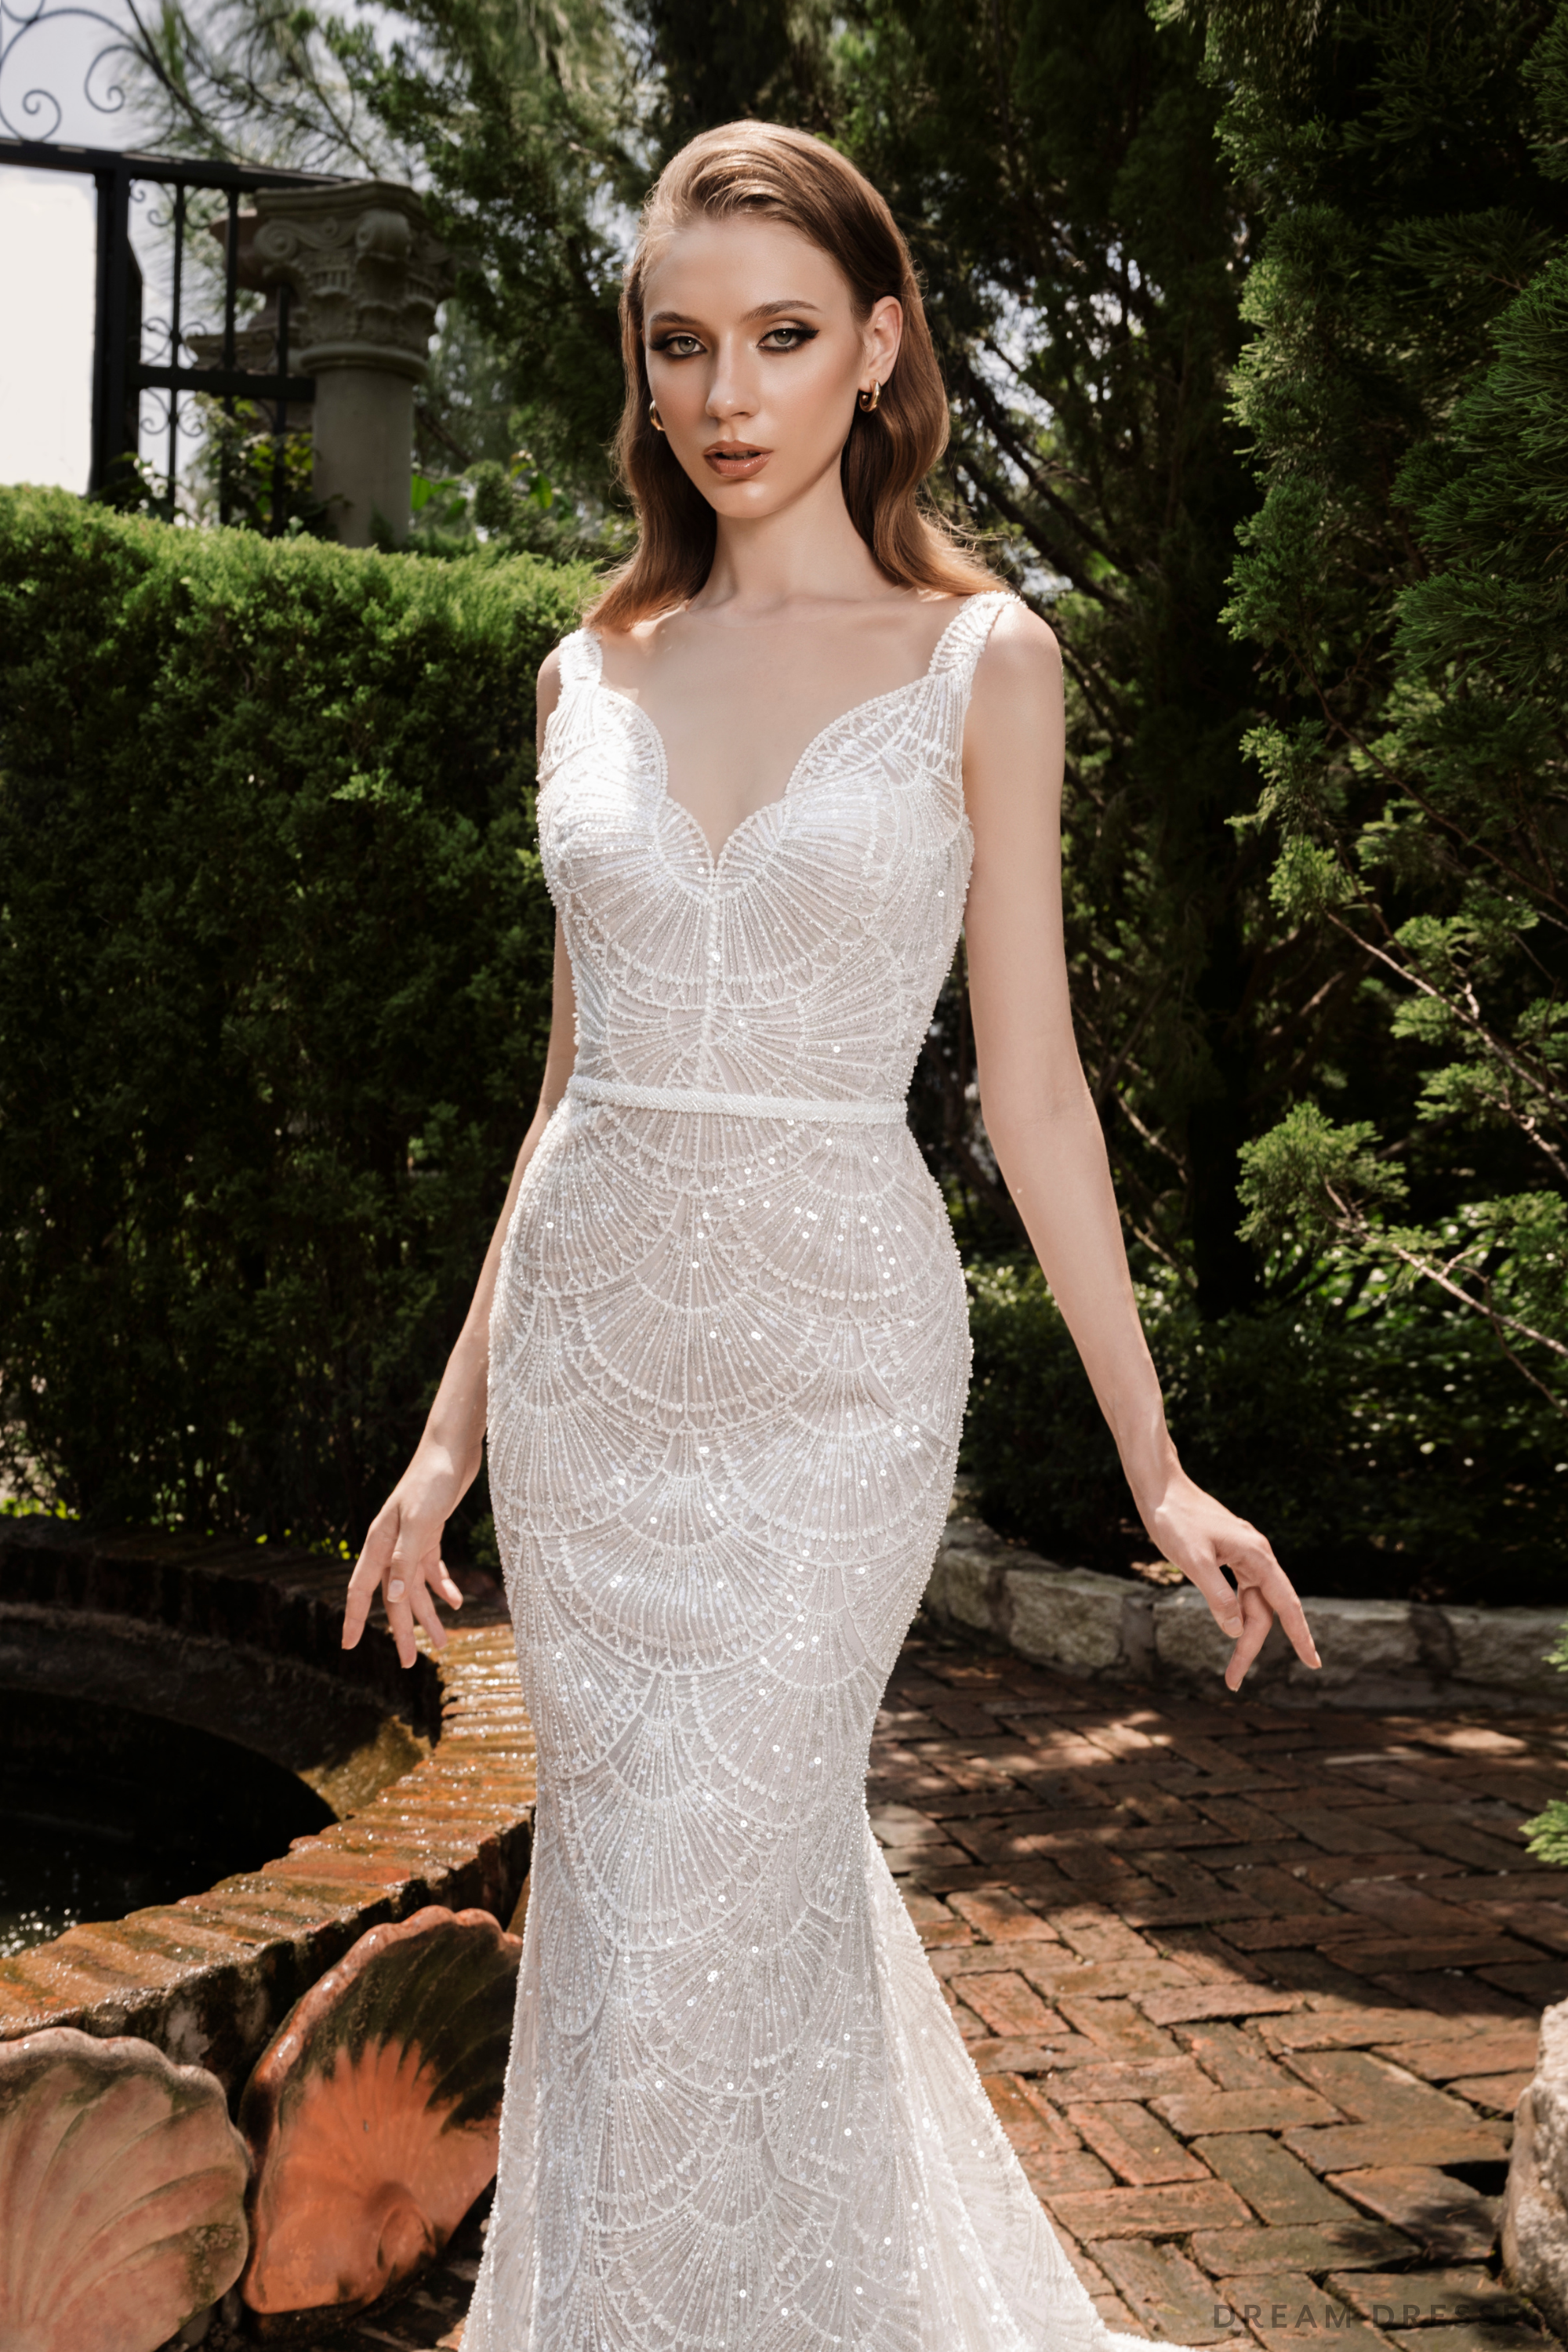 Mermaid Wedding Dress with Beaded Couture Lace (#ARABELLA)